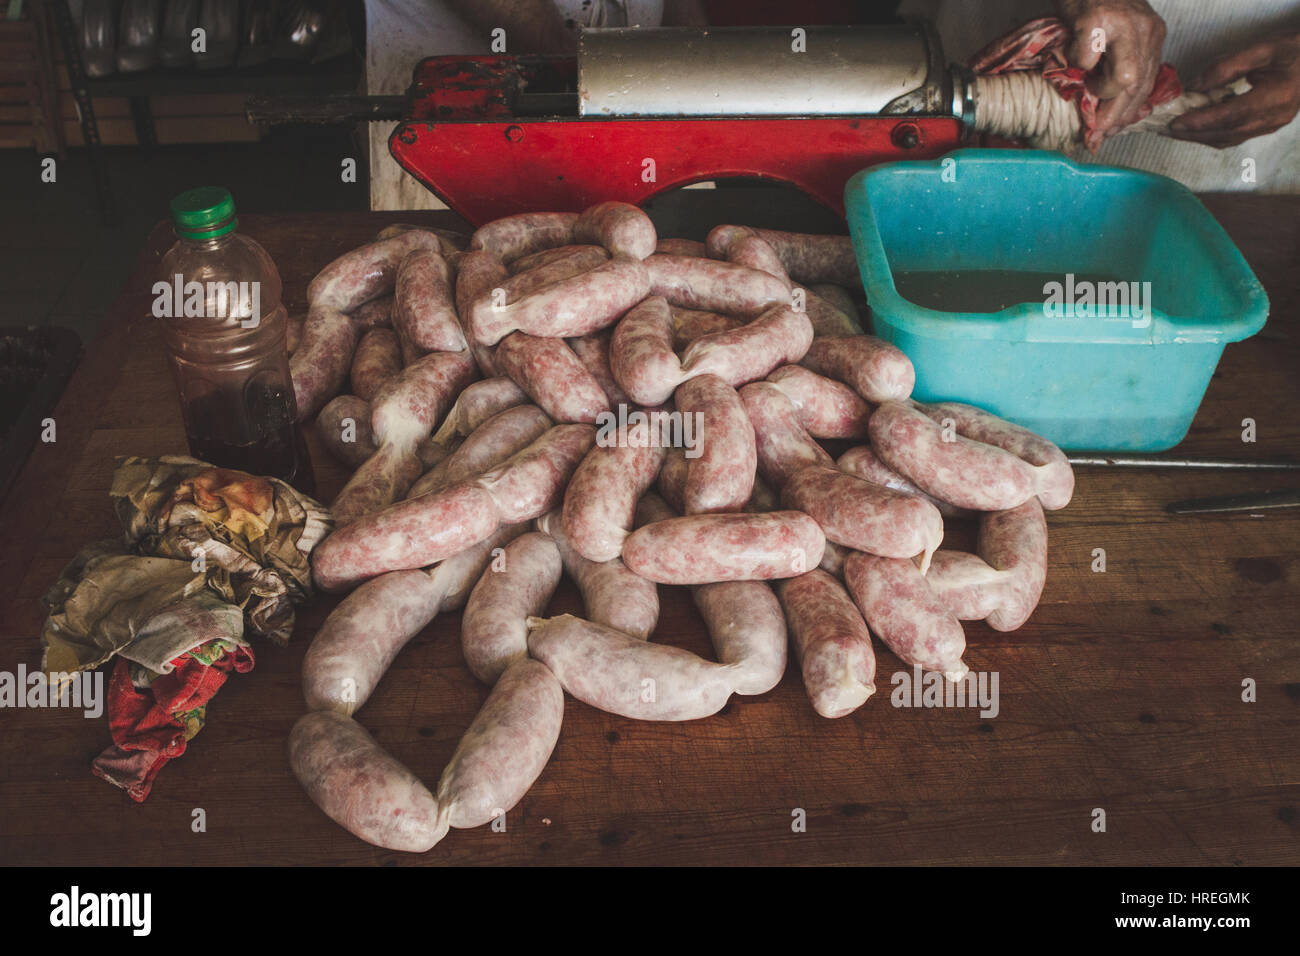 Sausage making in a slaughterhouse in Alba, which is located in the province of Piedmont, Italy. Stock Photo